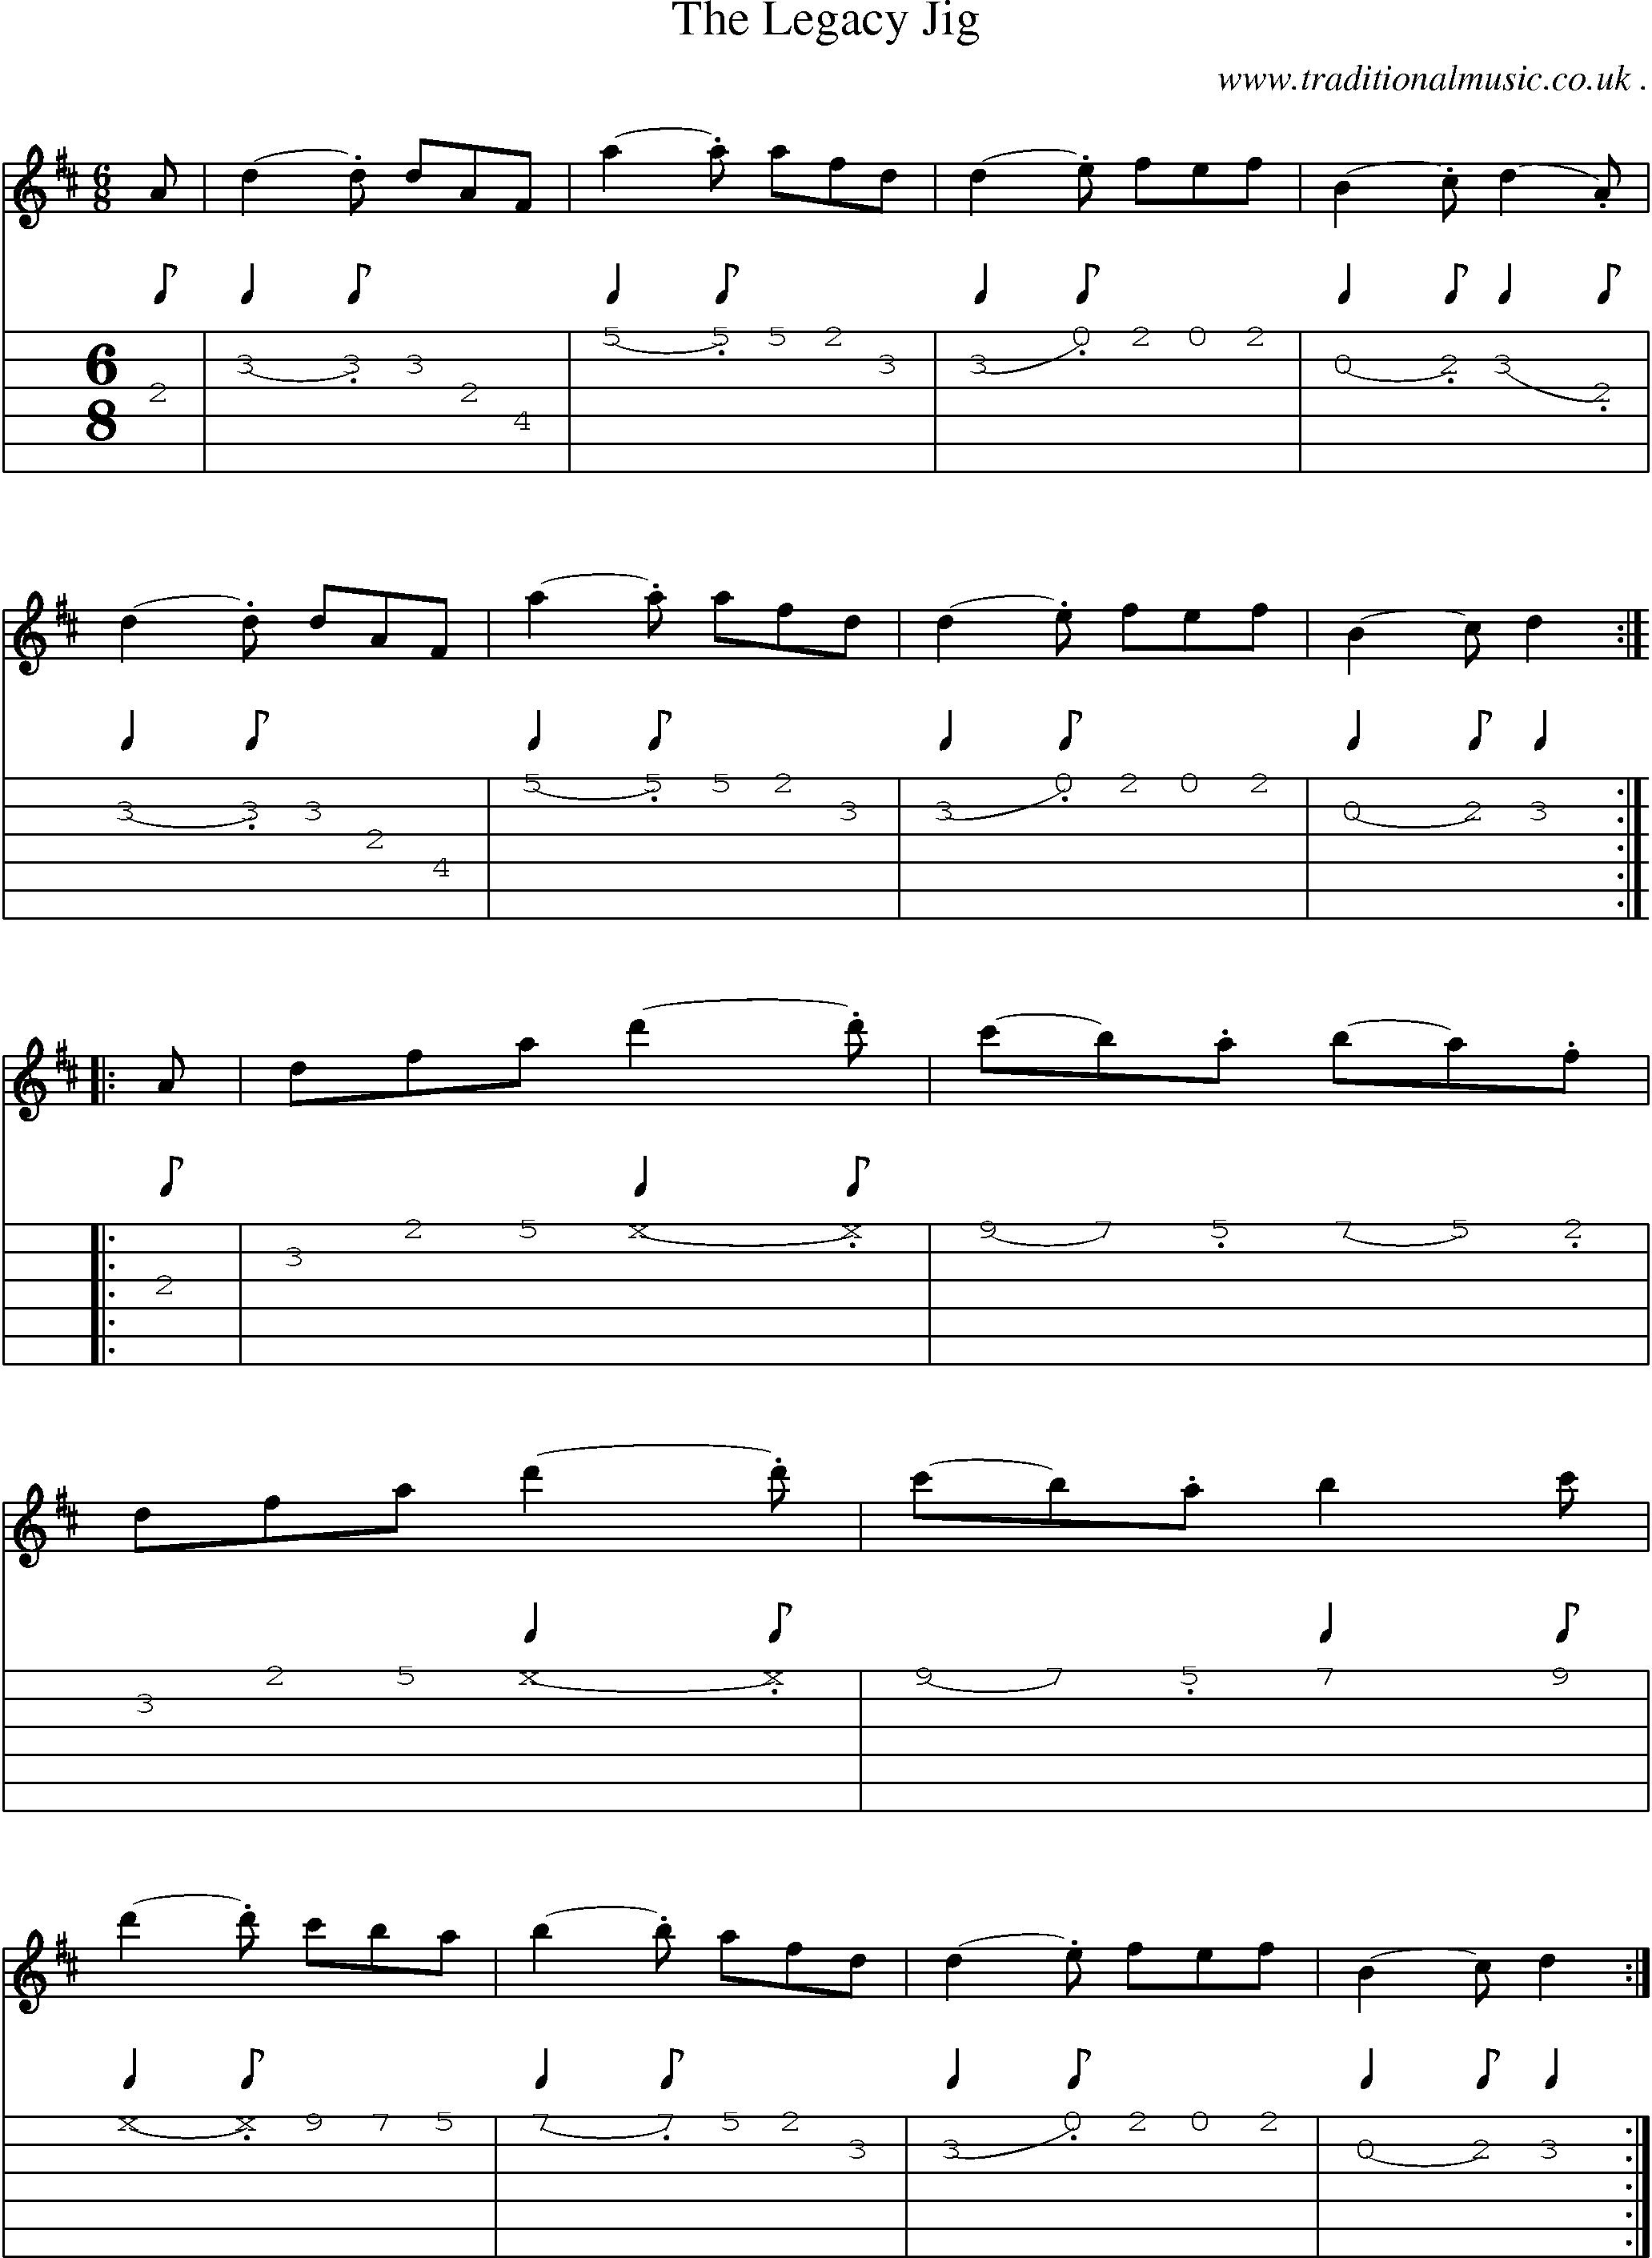 Sheet-Music and Guitar Tabs for The Legacy Jig